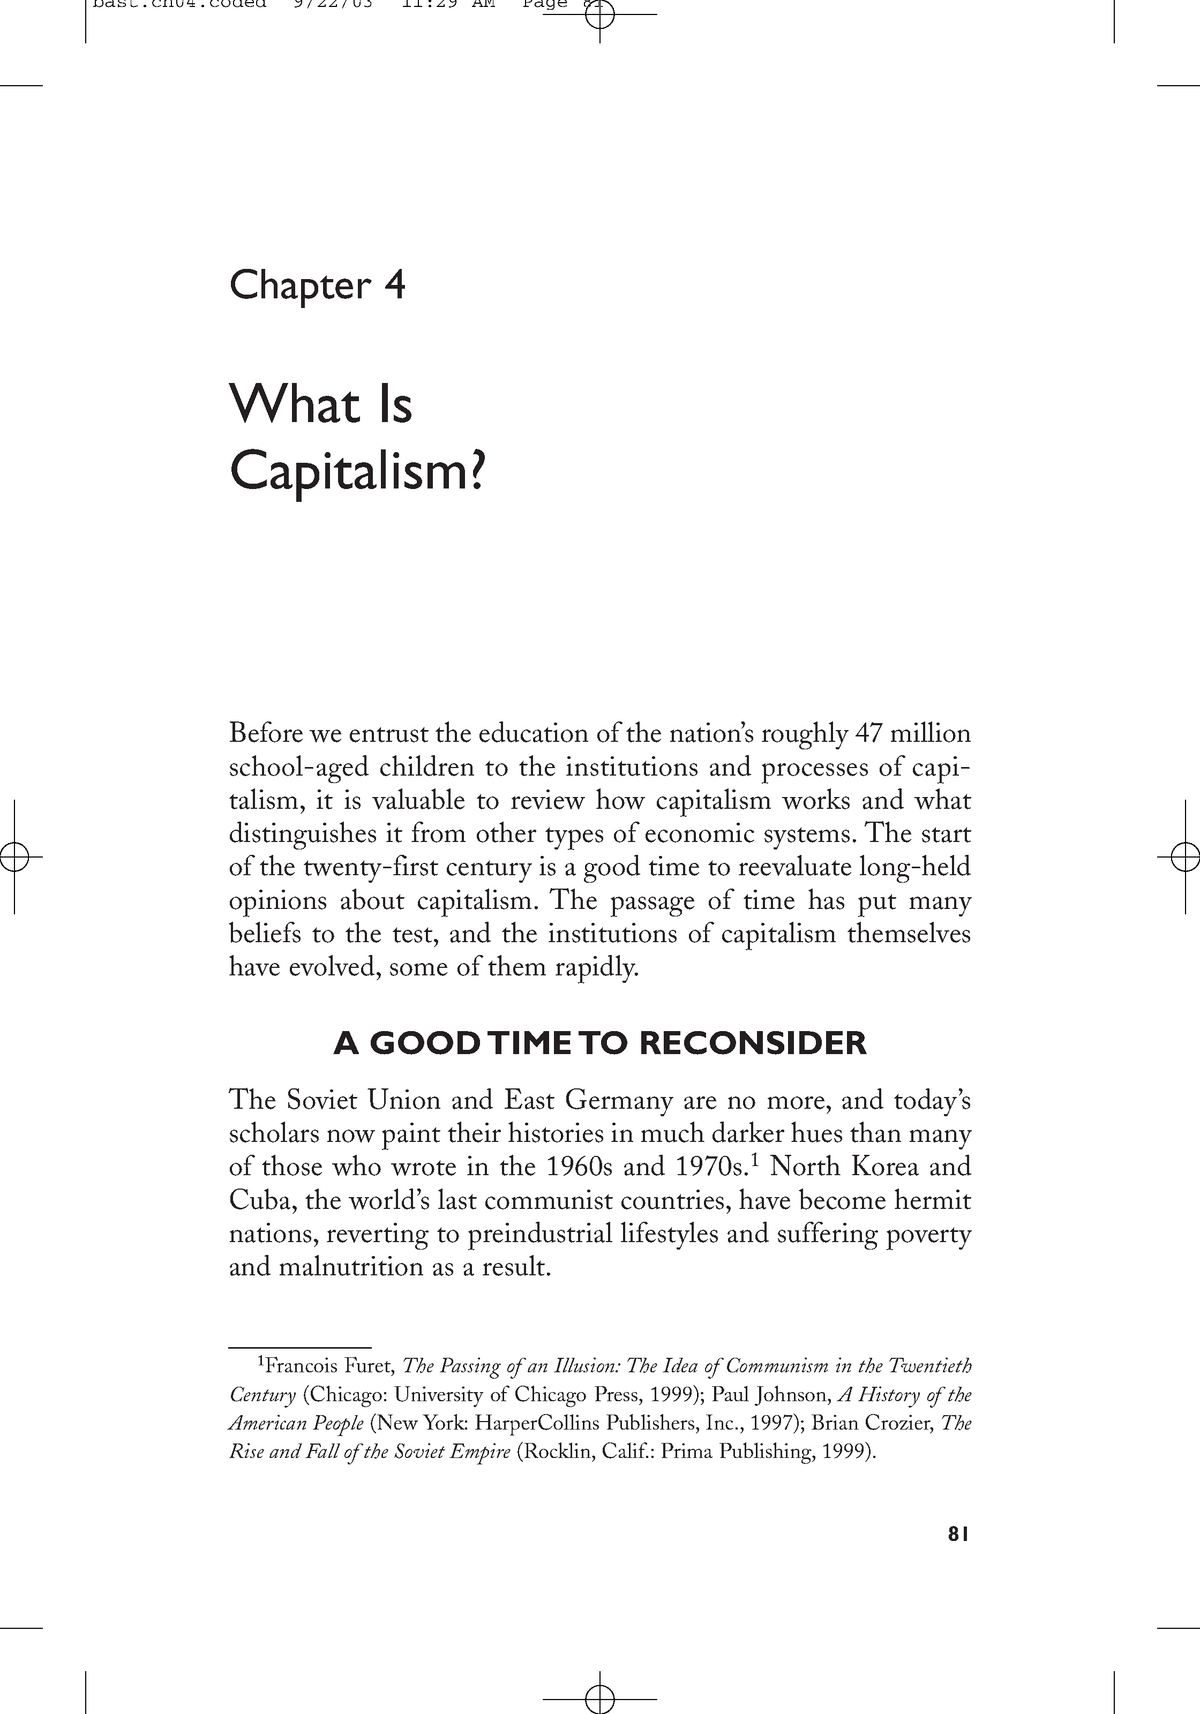 essay titles about capitalism